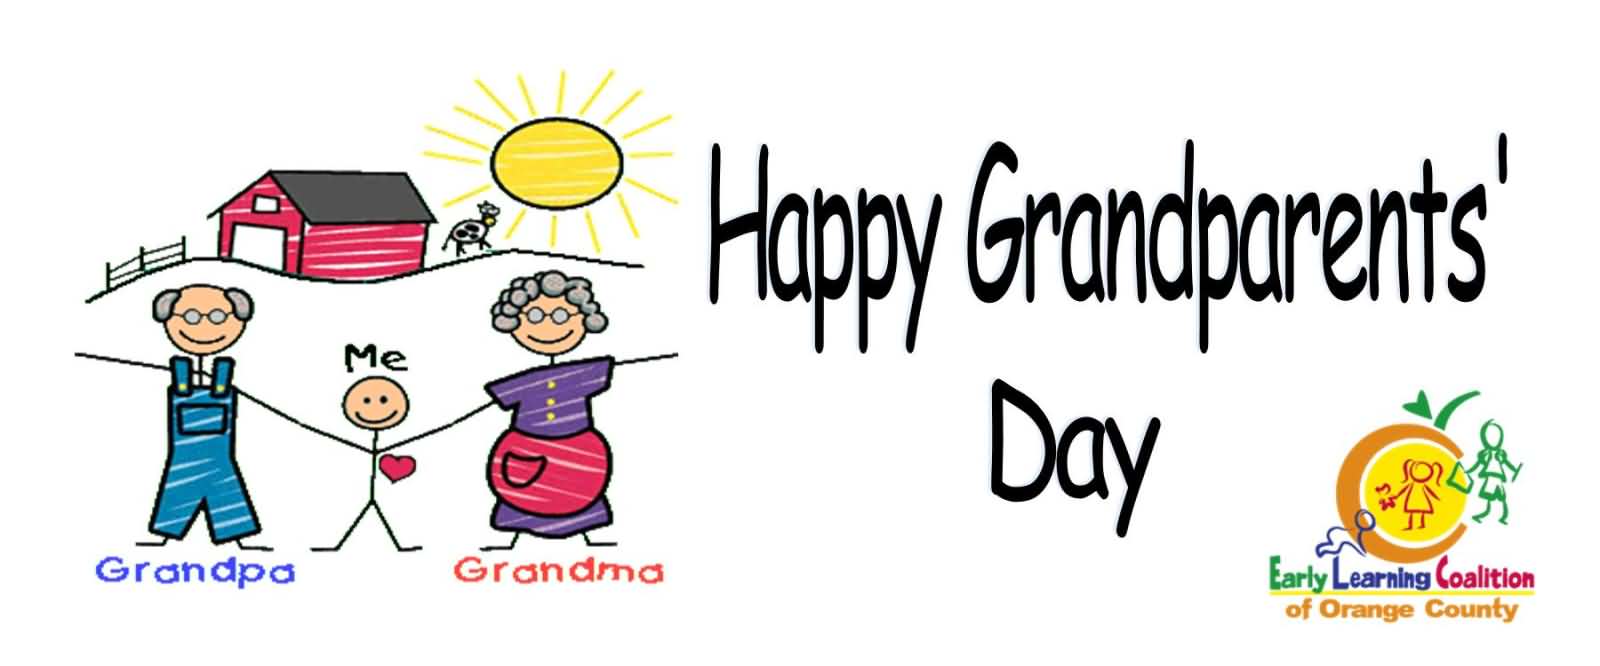 Happy Grandparents Day clipart image